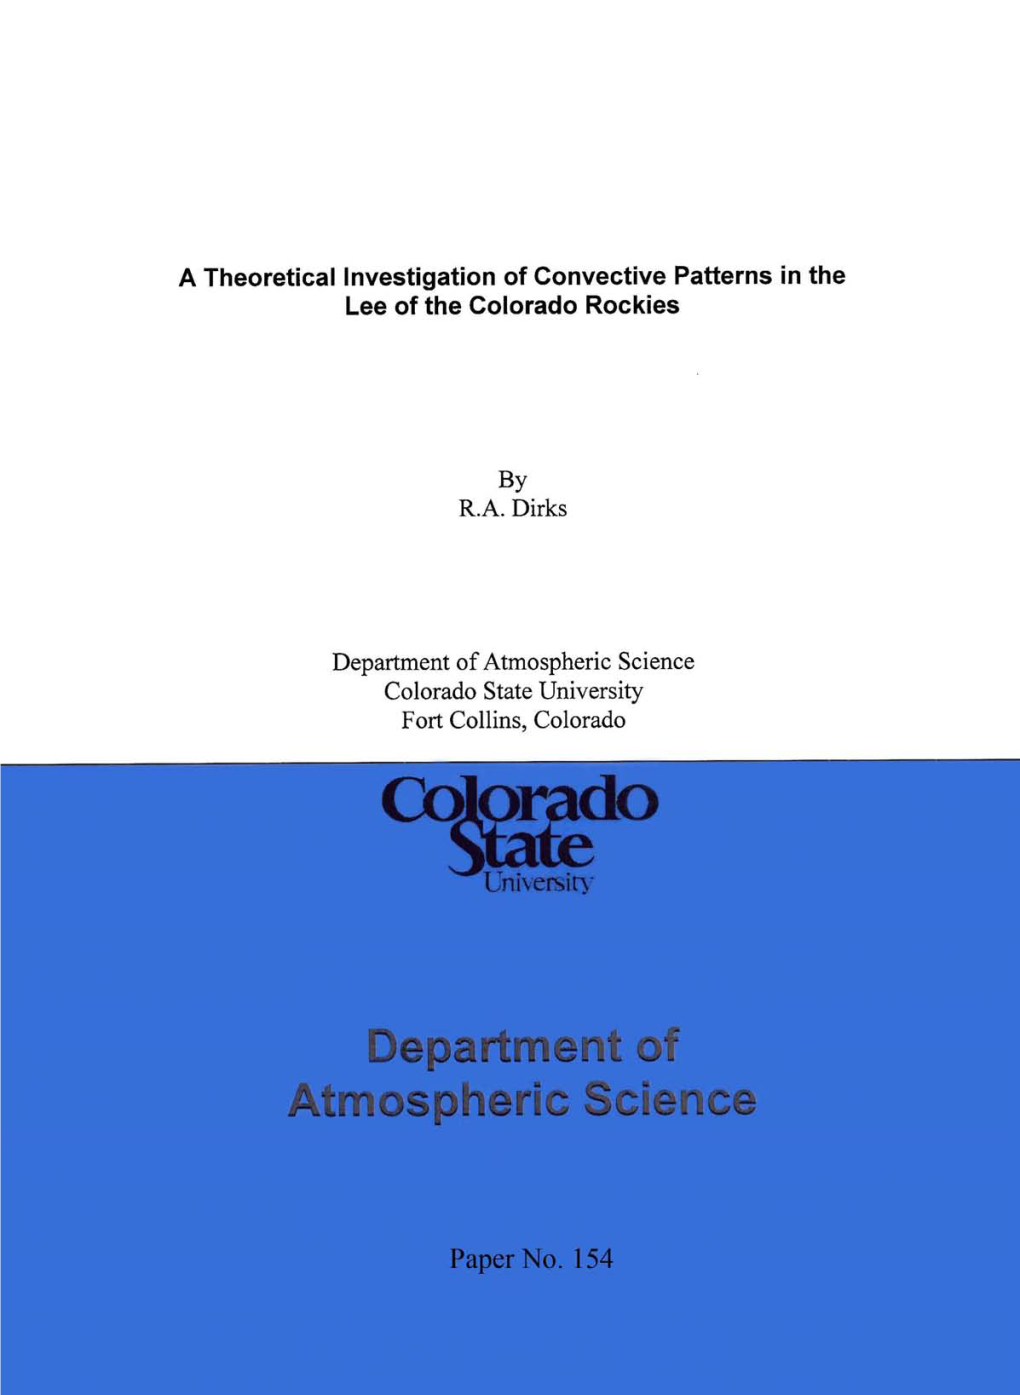 A Theoretical Investigation of Convective Patterns in the Lee of the Colorado Rockies